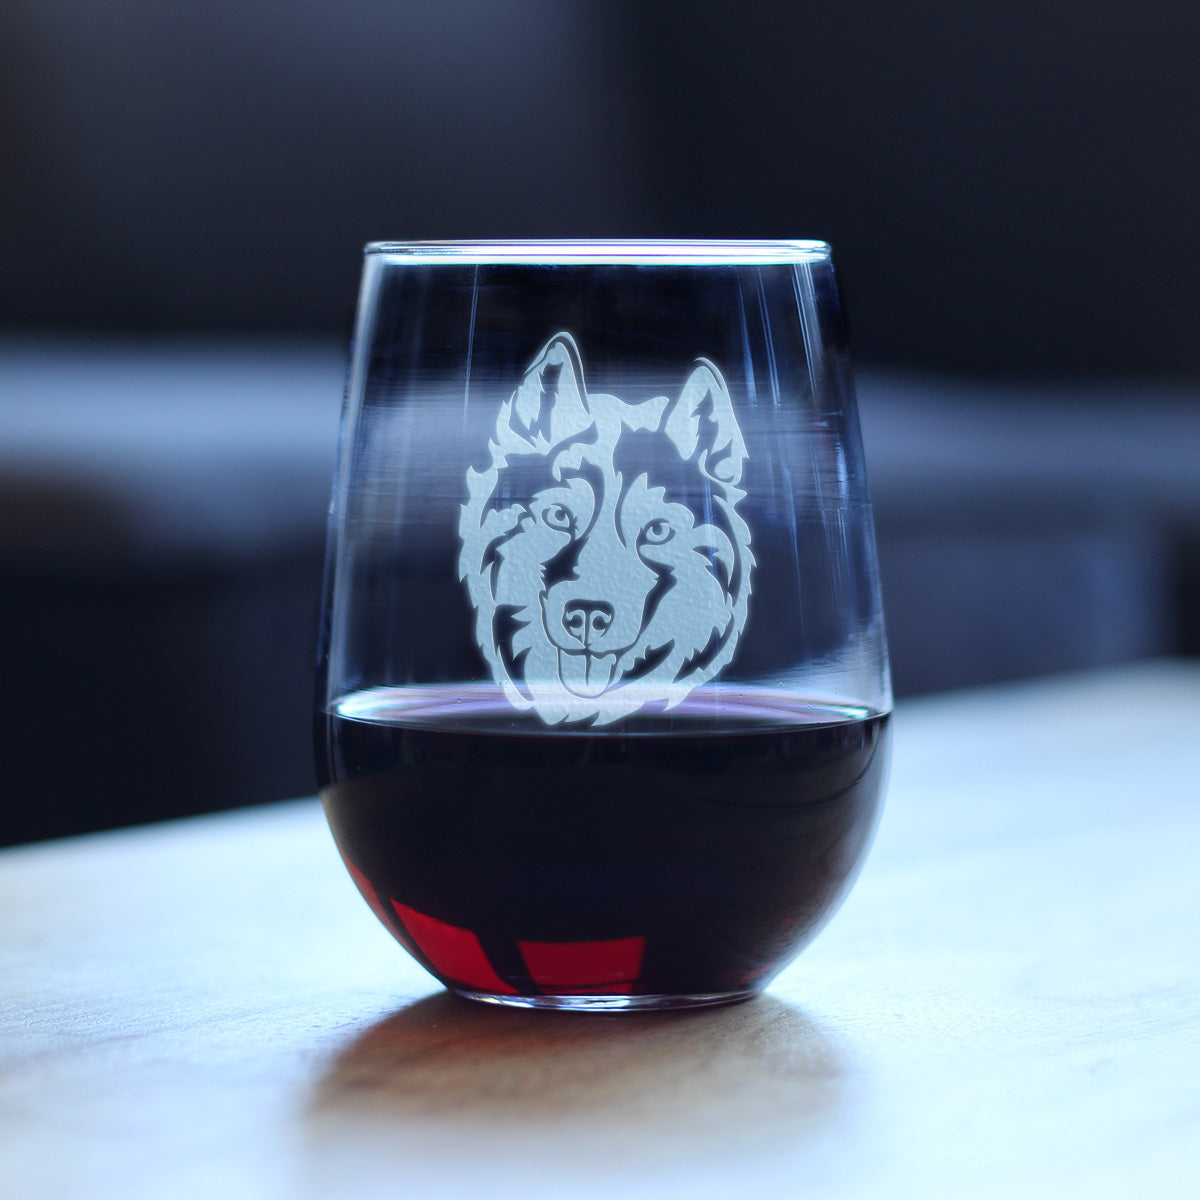 Siberian Husky Face Stemless Wine Glass - Cute Dog Themed Decor and Gifts Moms &amp; Dads of Huskies - Large 17 Oz